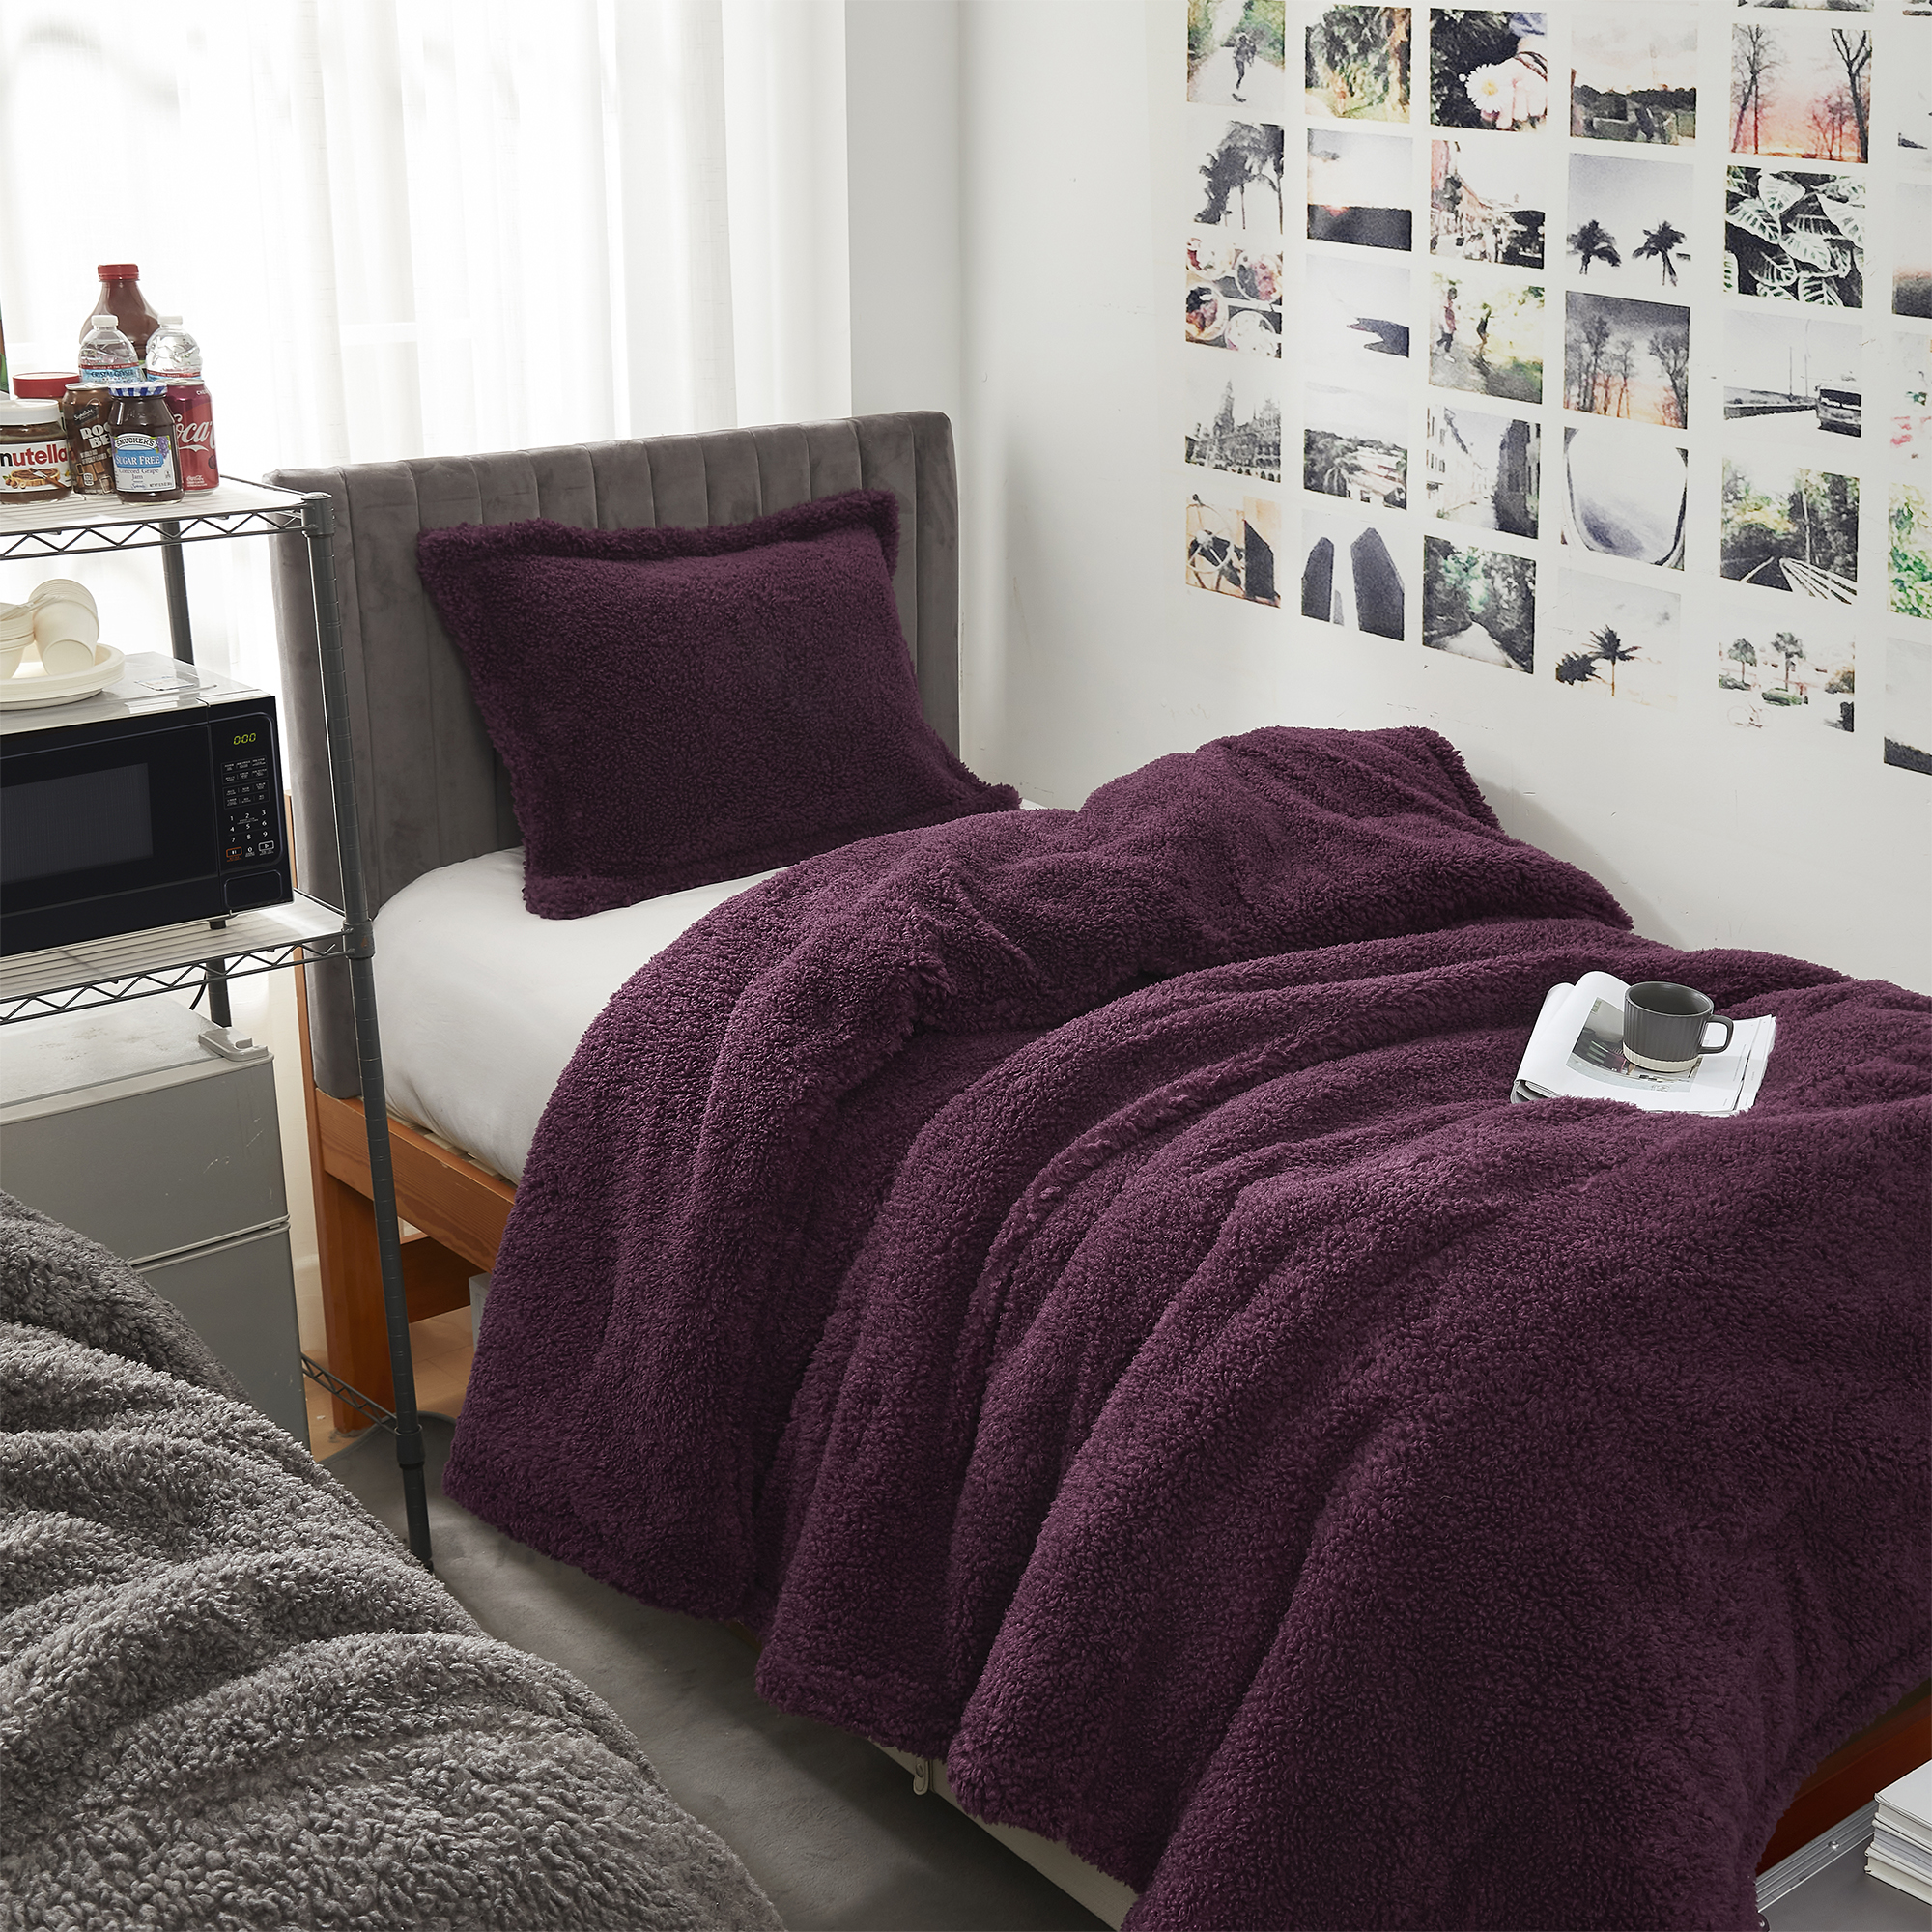 Unfluffin Believable - Coma Inducer® Oversized Twin Comforter - Burgundy